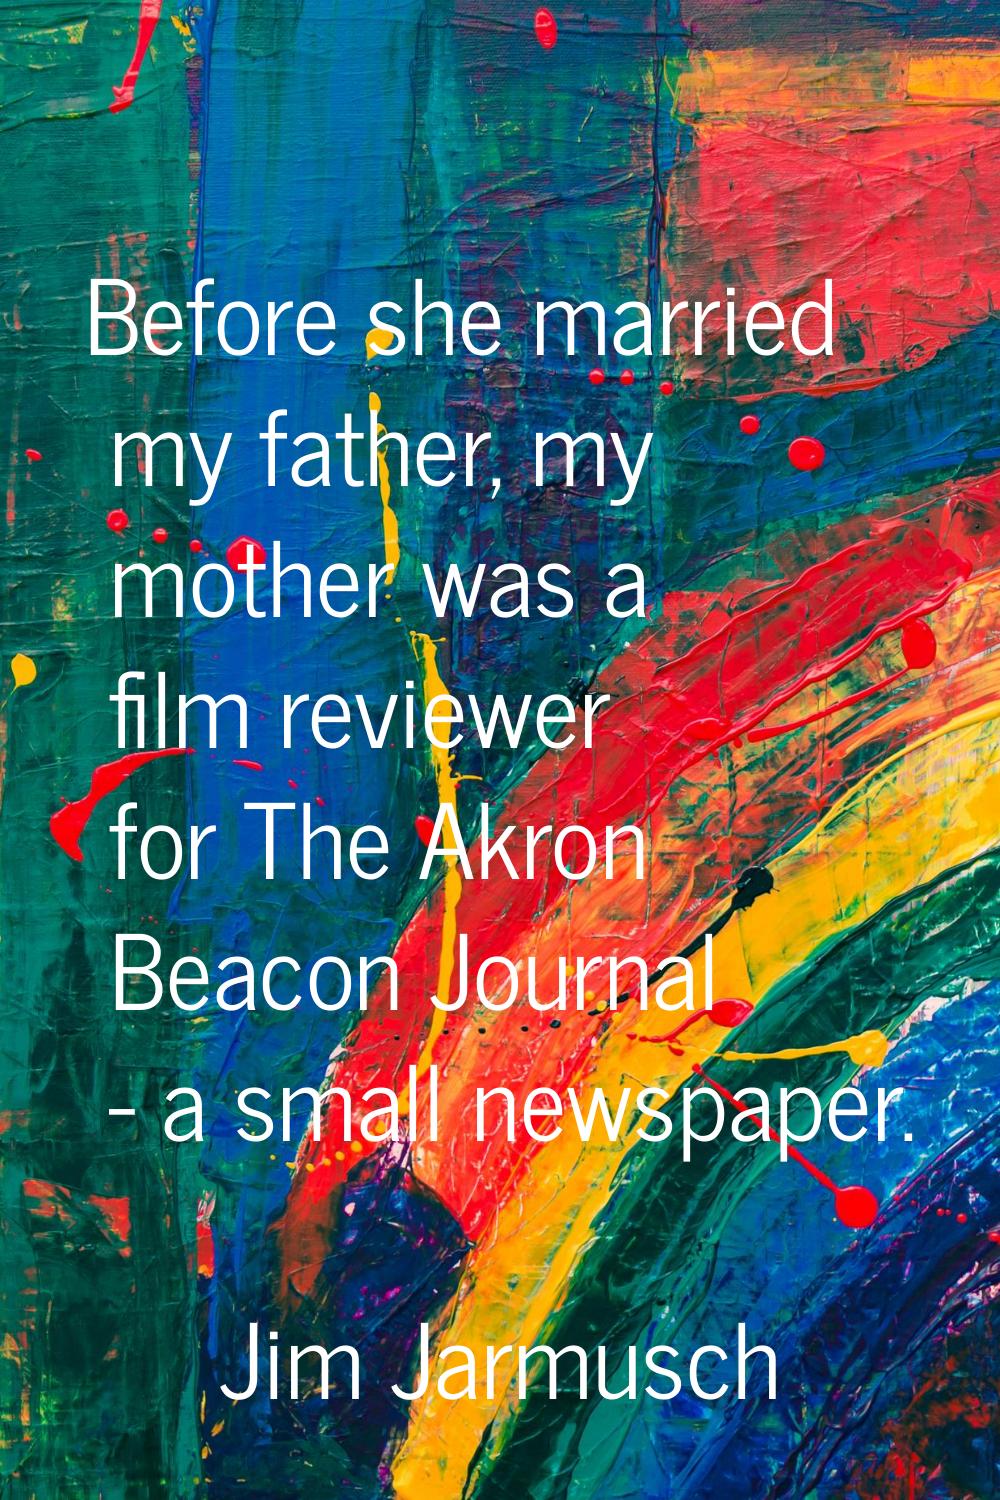 Before she married my father, my mother was a film reviewer for The Akron Beacon Journal - a small 